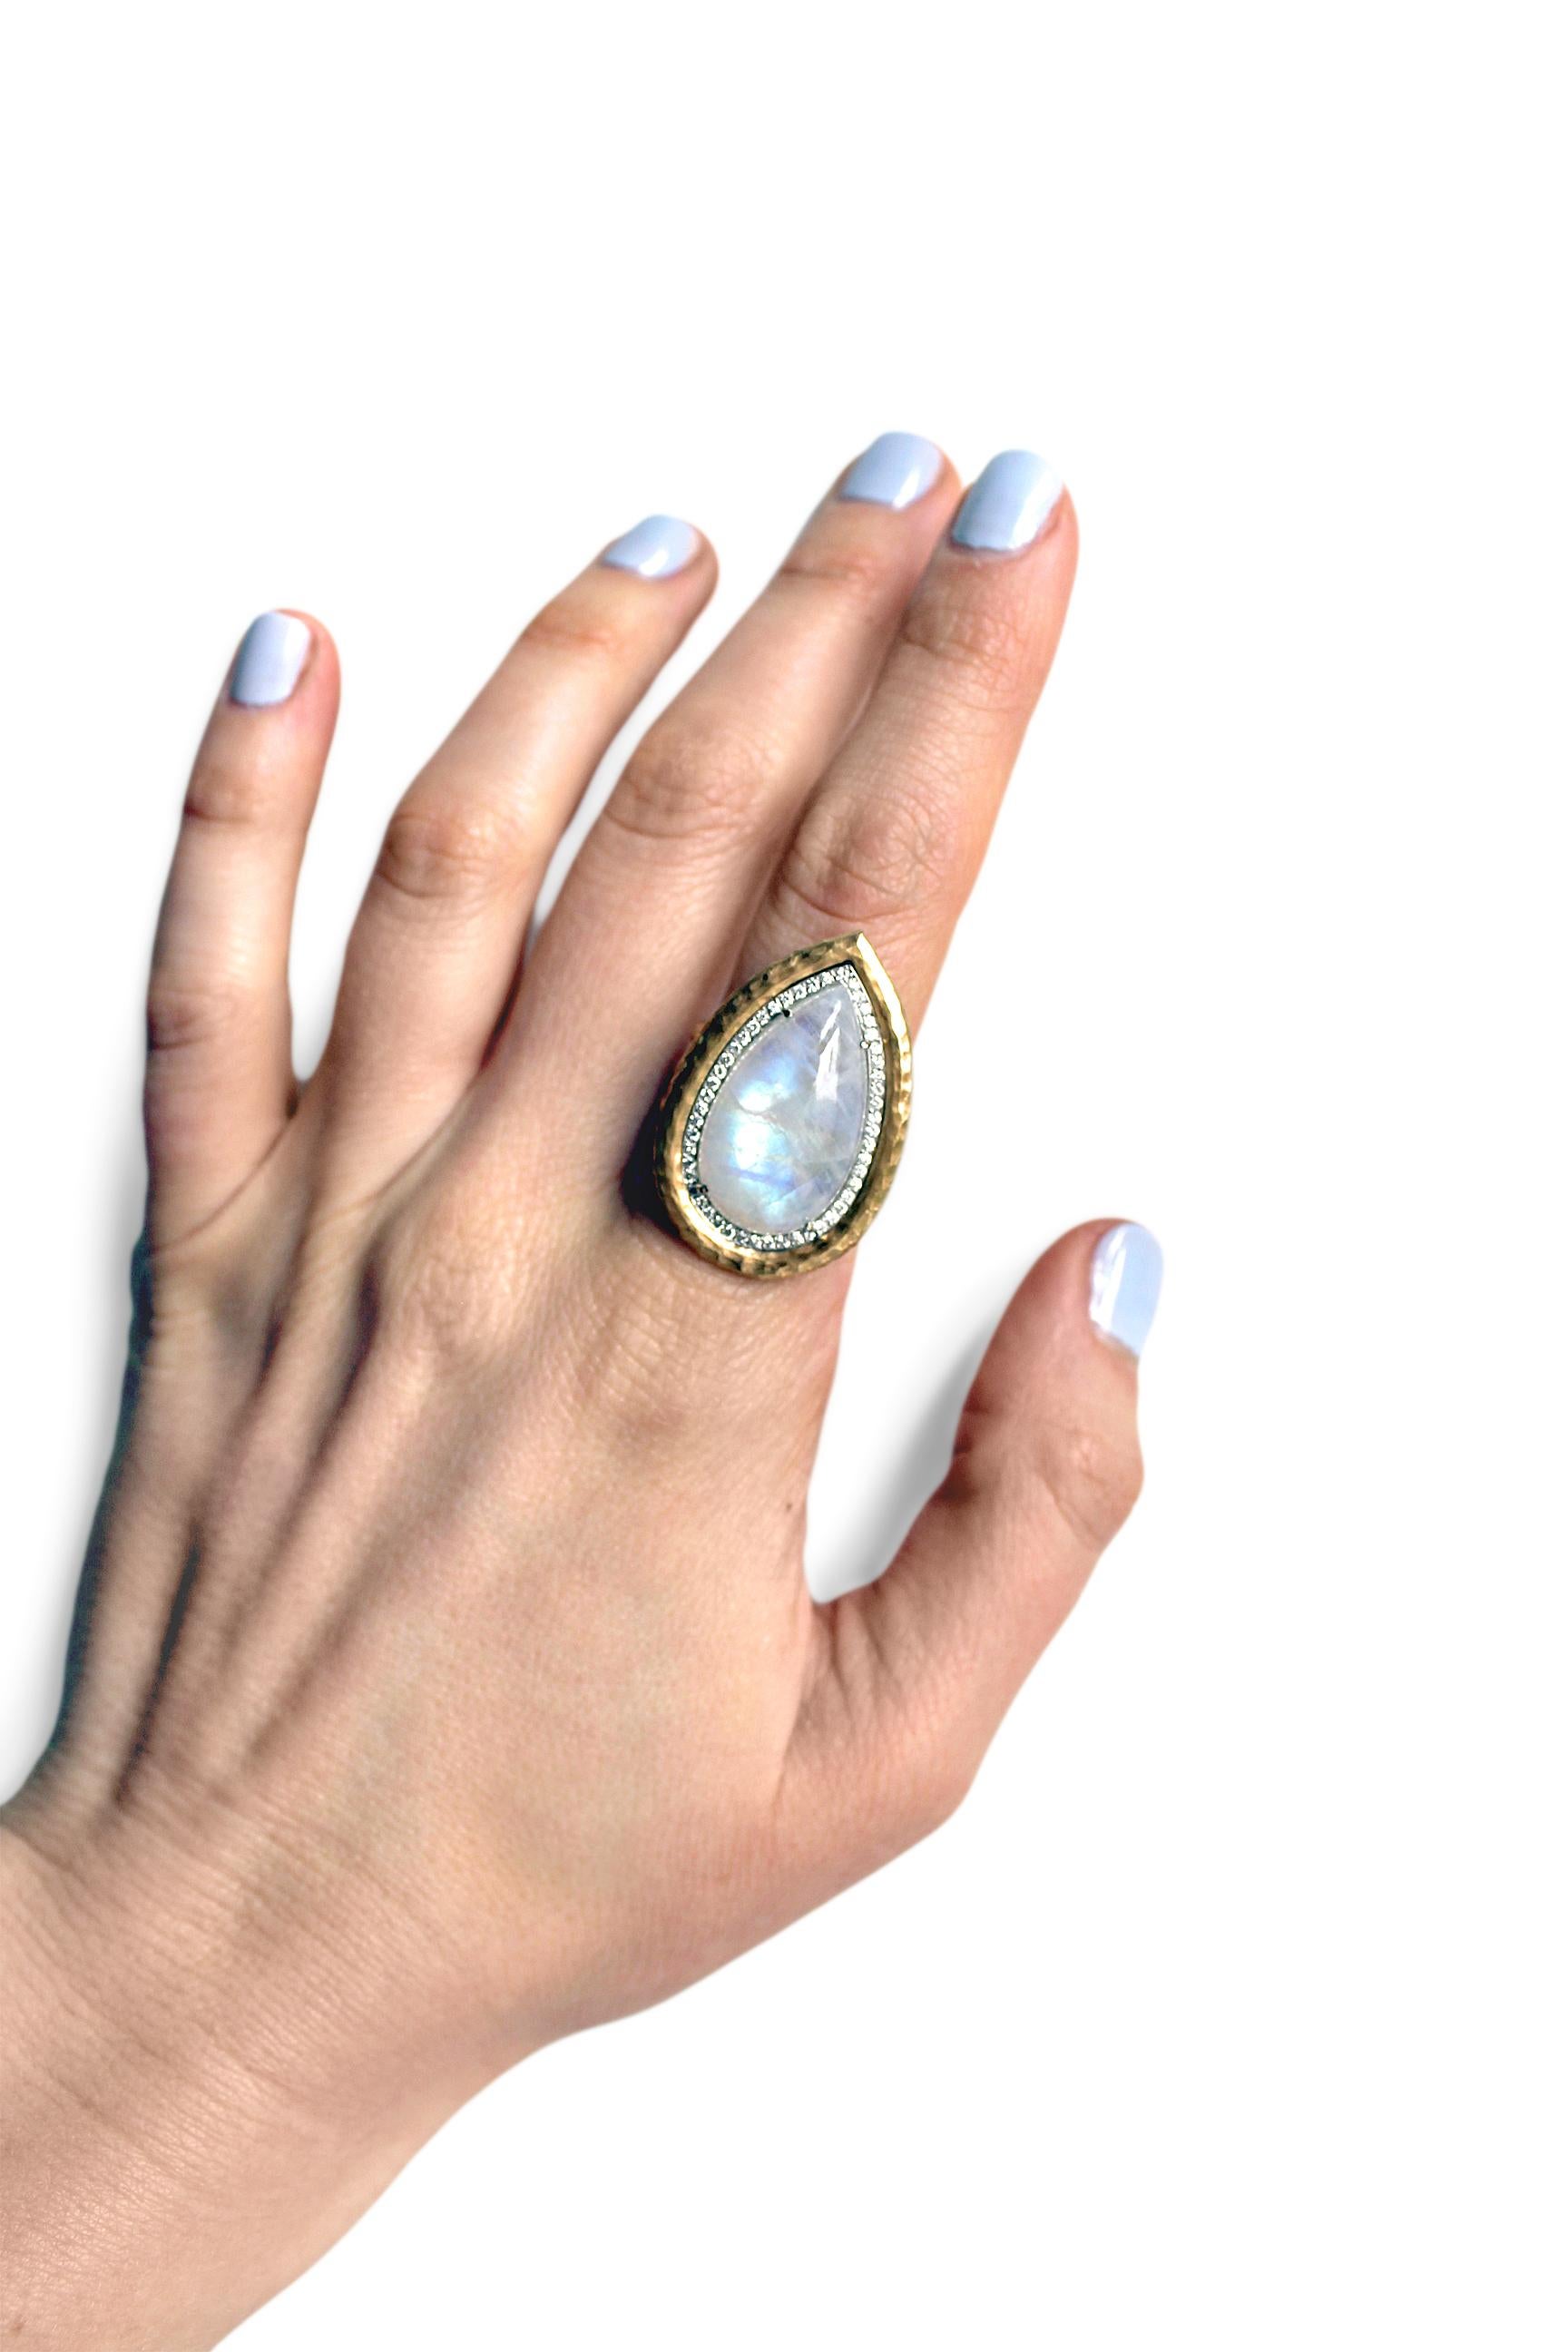 One-of-a-Kind Empress Ring handcrafted by jewelry designer Pamela Froman in hammered and matte-finished 18k yellow gold featuring an exceptional 14.74 carat pear-shaped rainbow moonstone cabochon and accented with 0.26 total carats of round